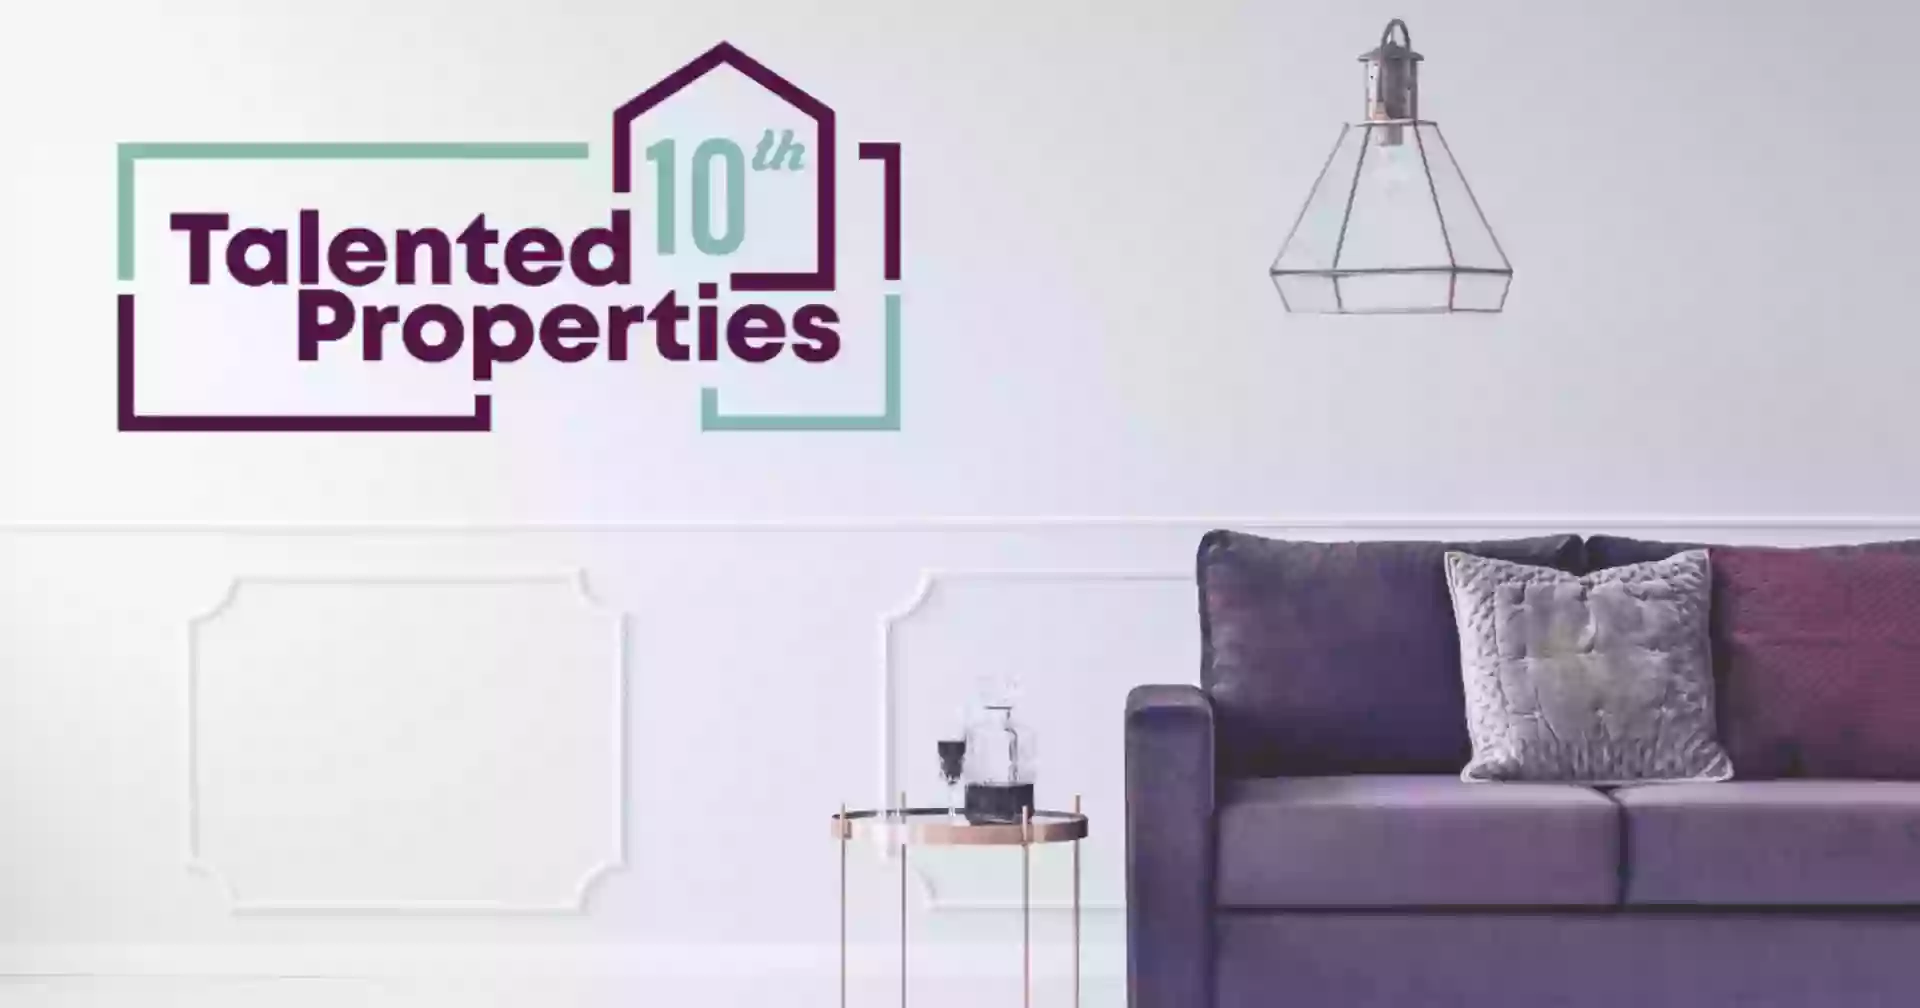 Talented 10th Properties